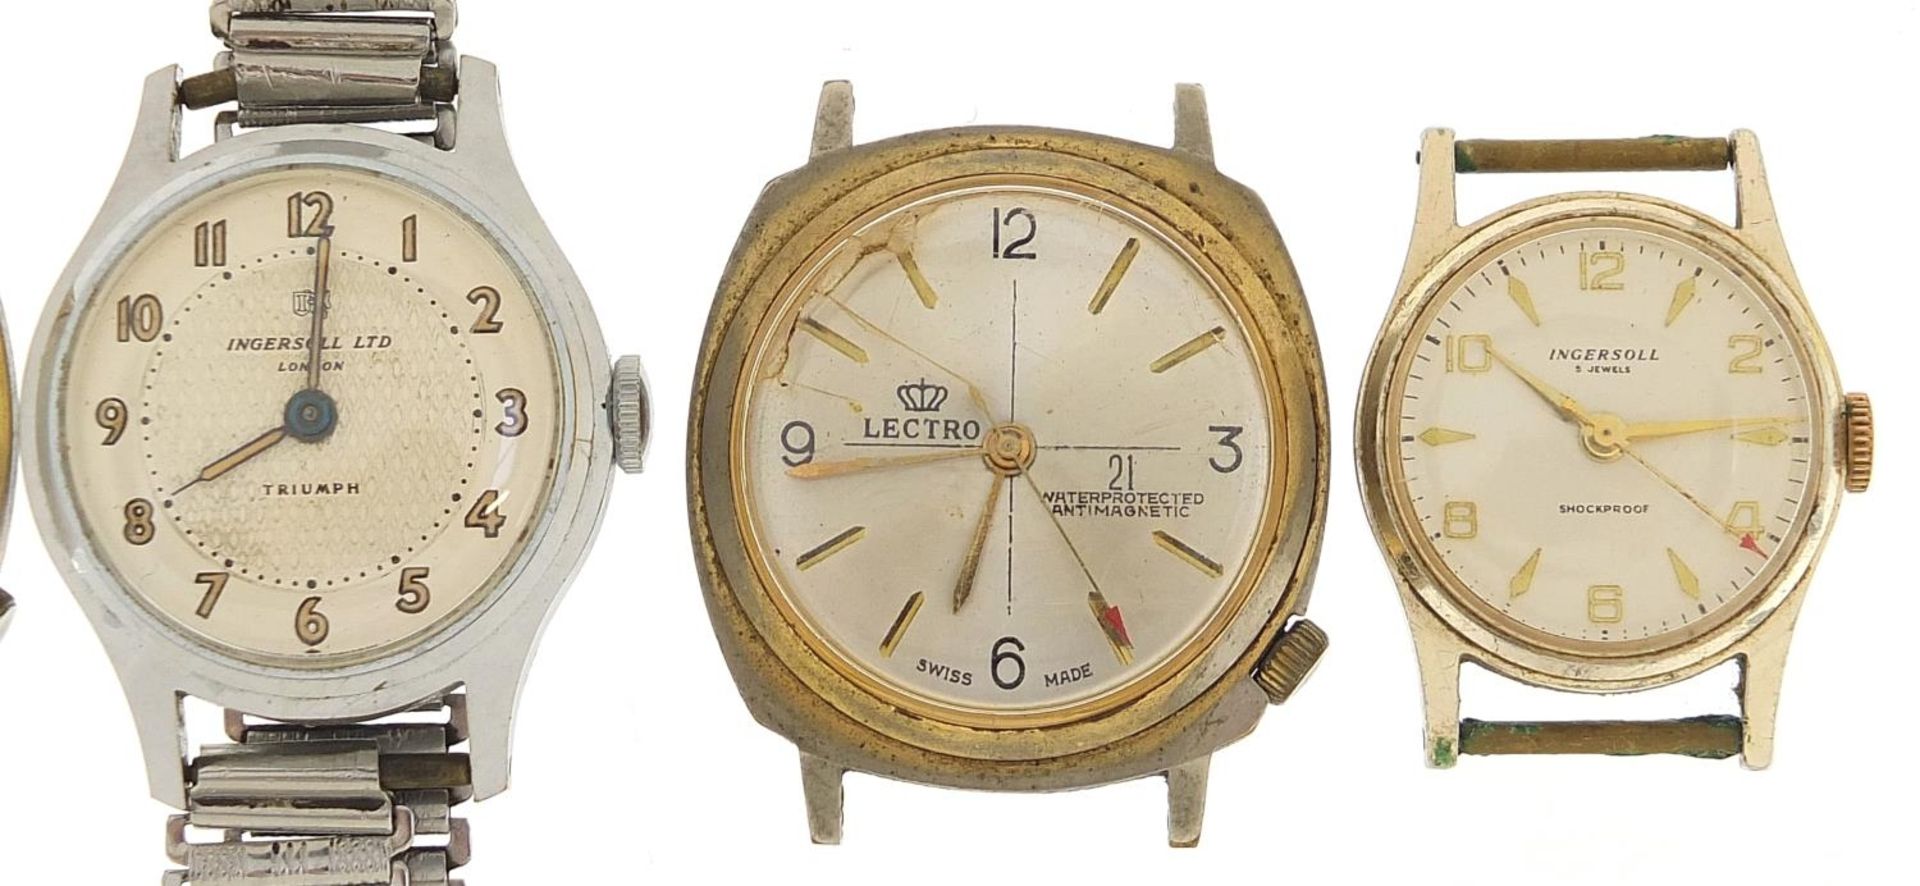 Five vintage wristwatches including Ingersoll Triumph, Memostar alarm, Lectro and Ingersoll - Image 3 of 5